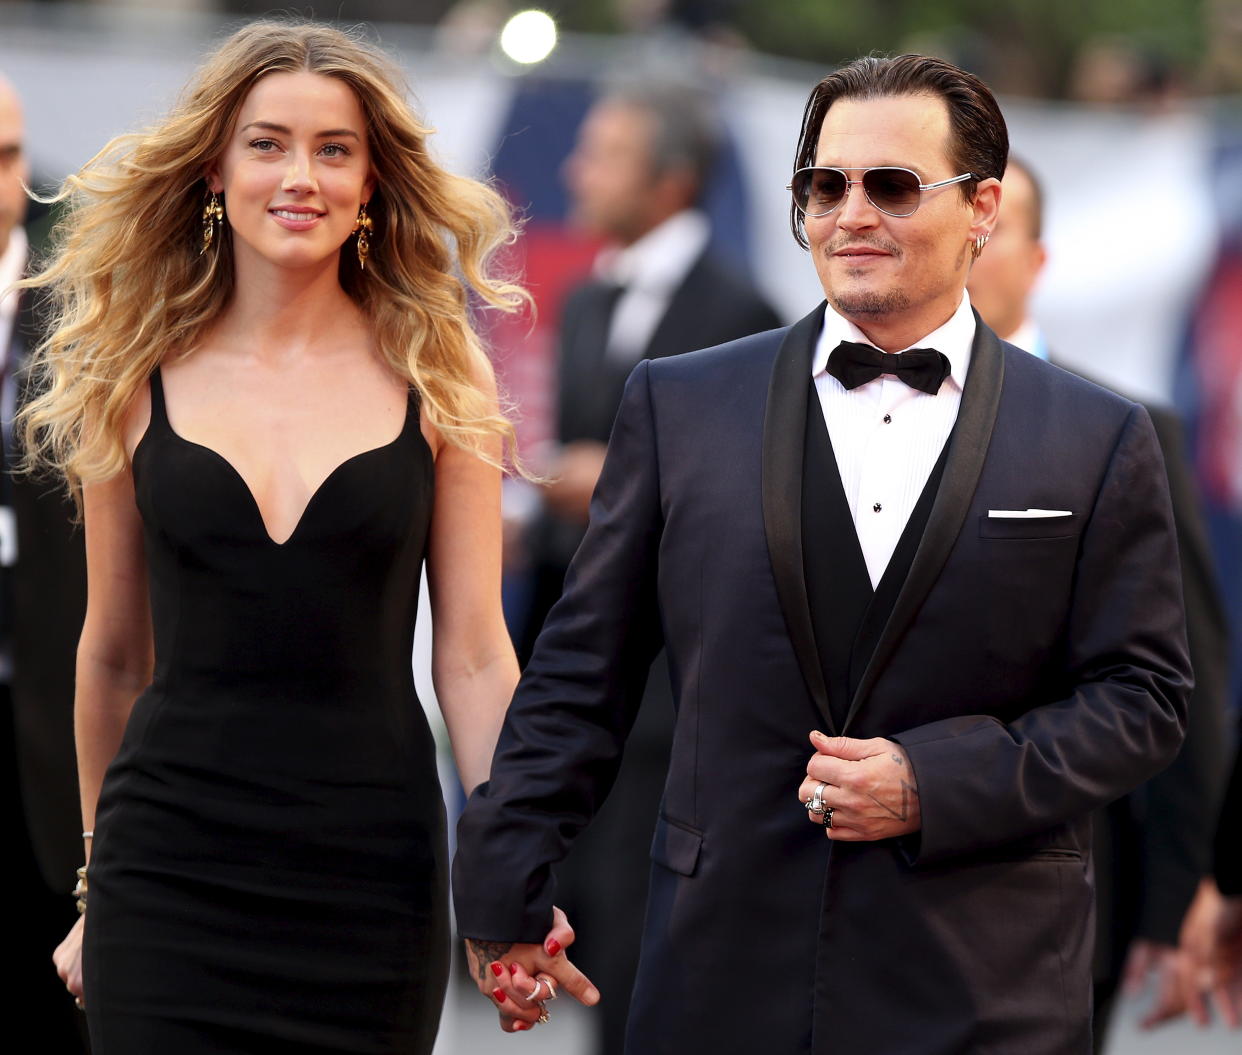 A jury will deliberate for a third day in Johnny Depp and Amber Heard's defamation case. Experts break down what that means.